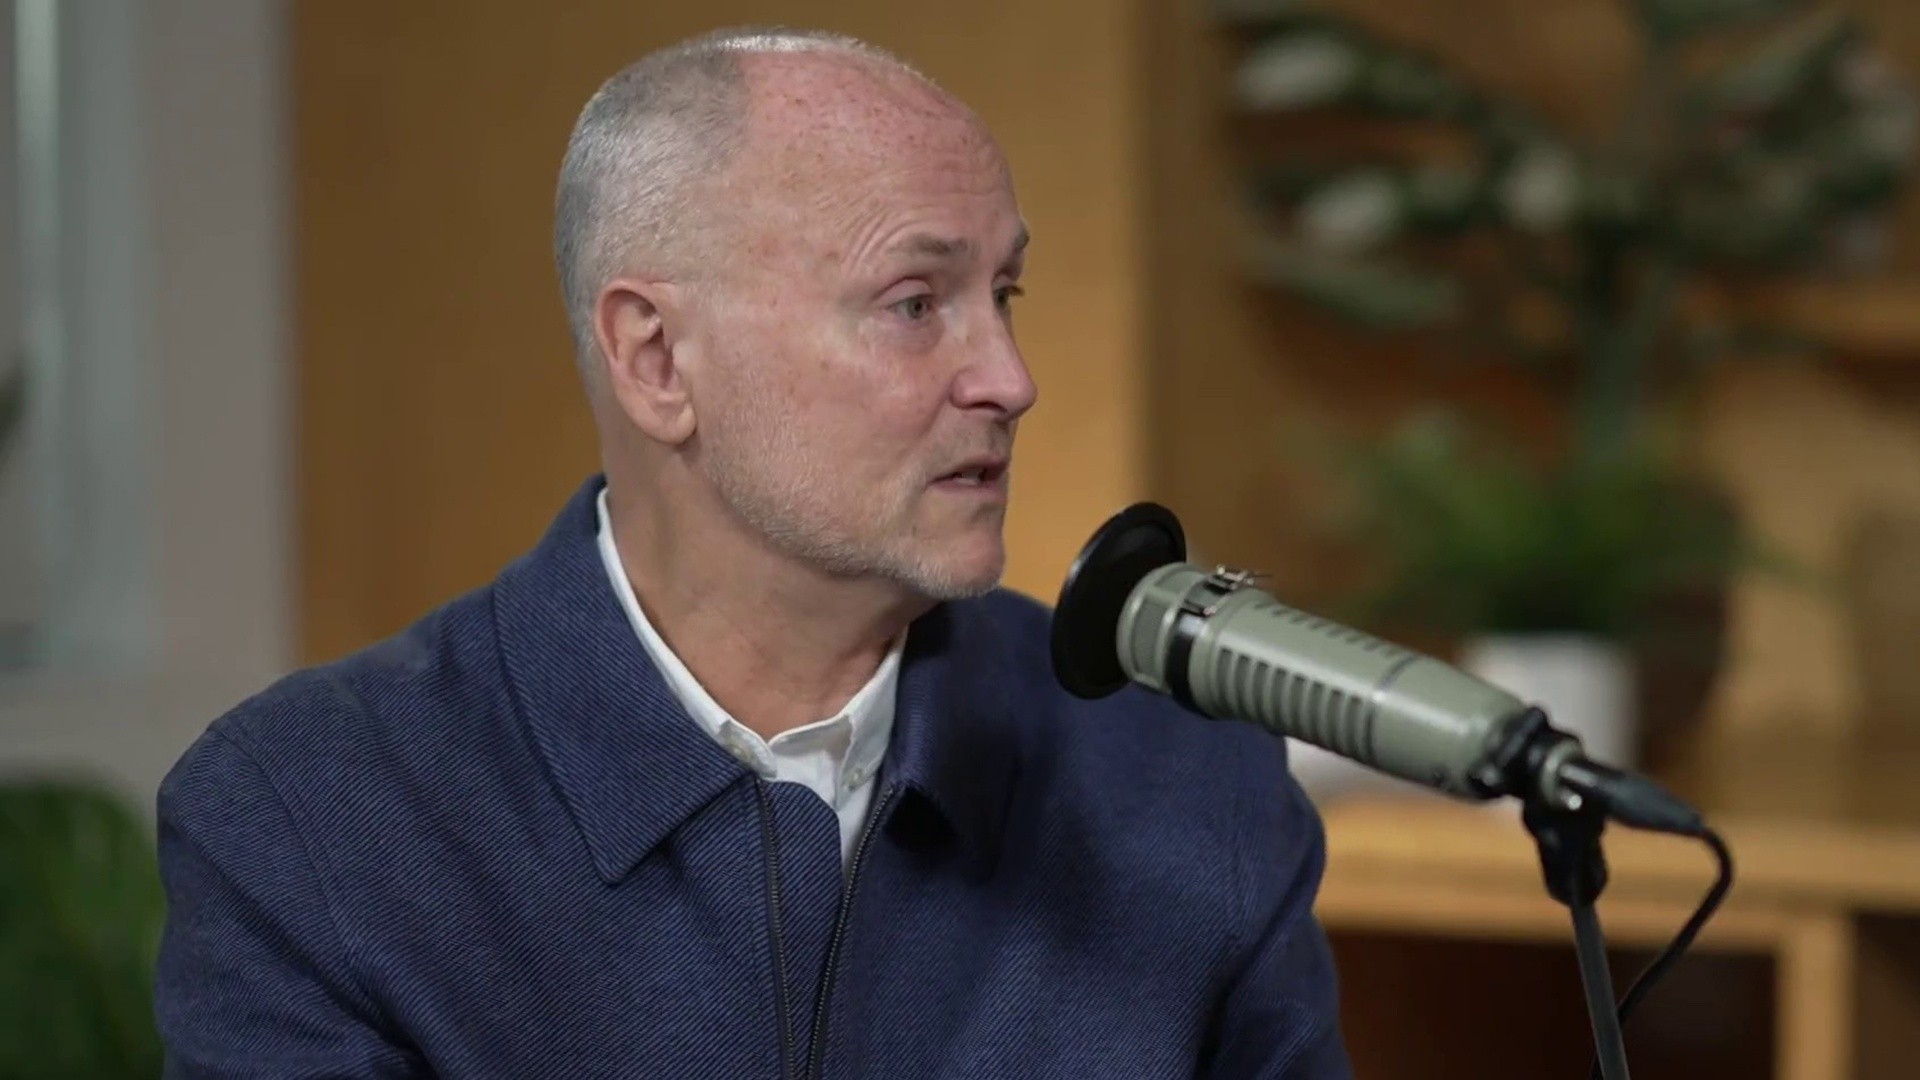 Author Chip Conley talks aging in newest 'Making Space' episode